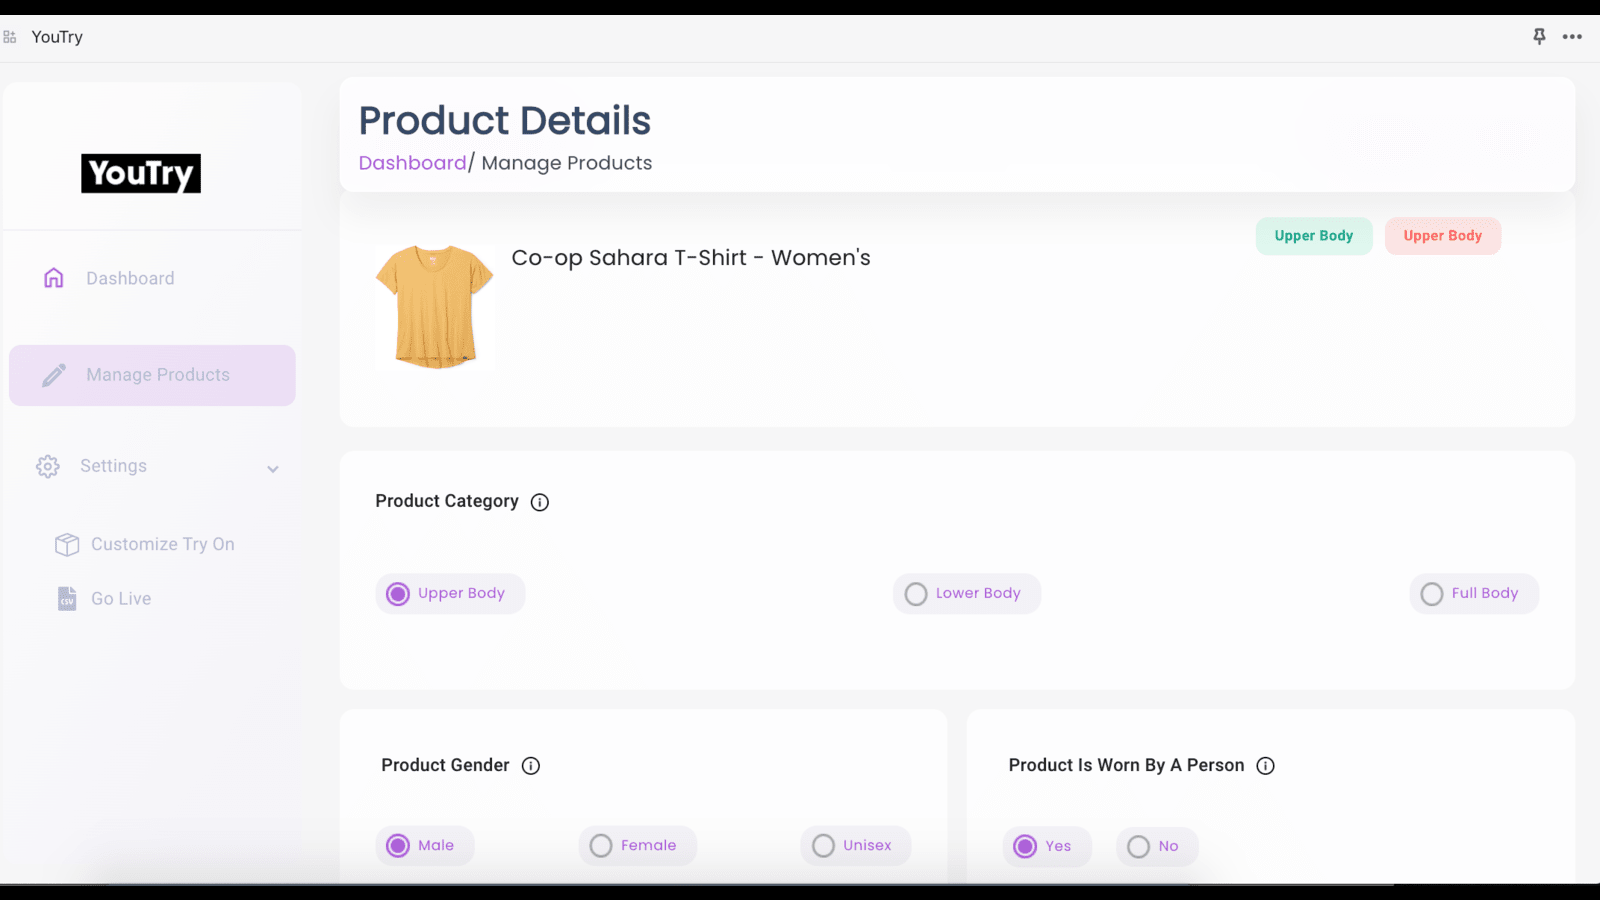 Adding product details inc. category, gender and best image